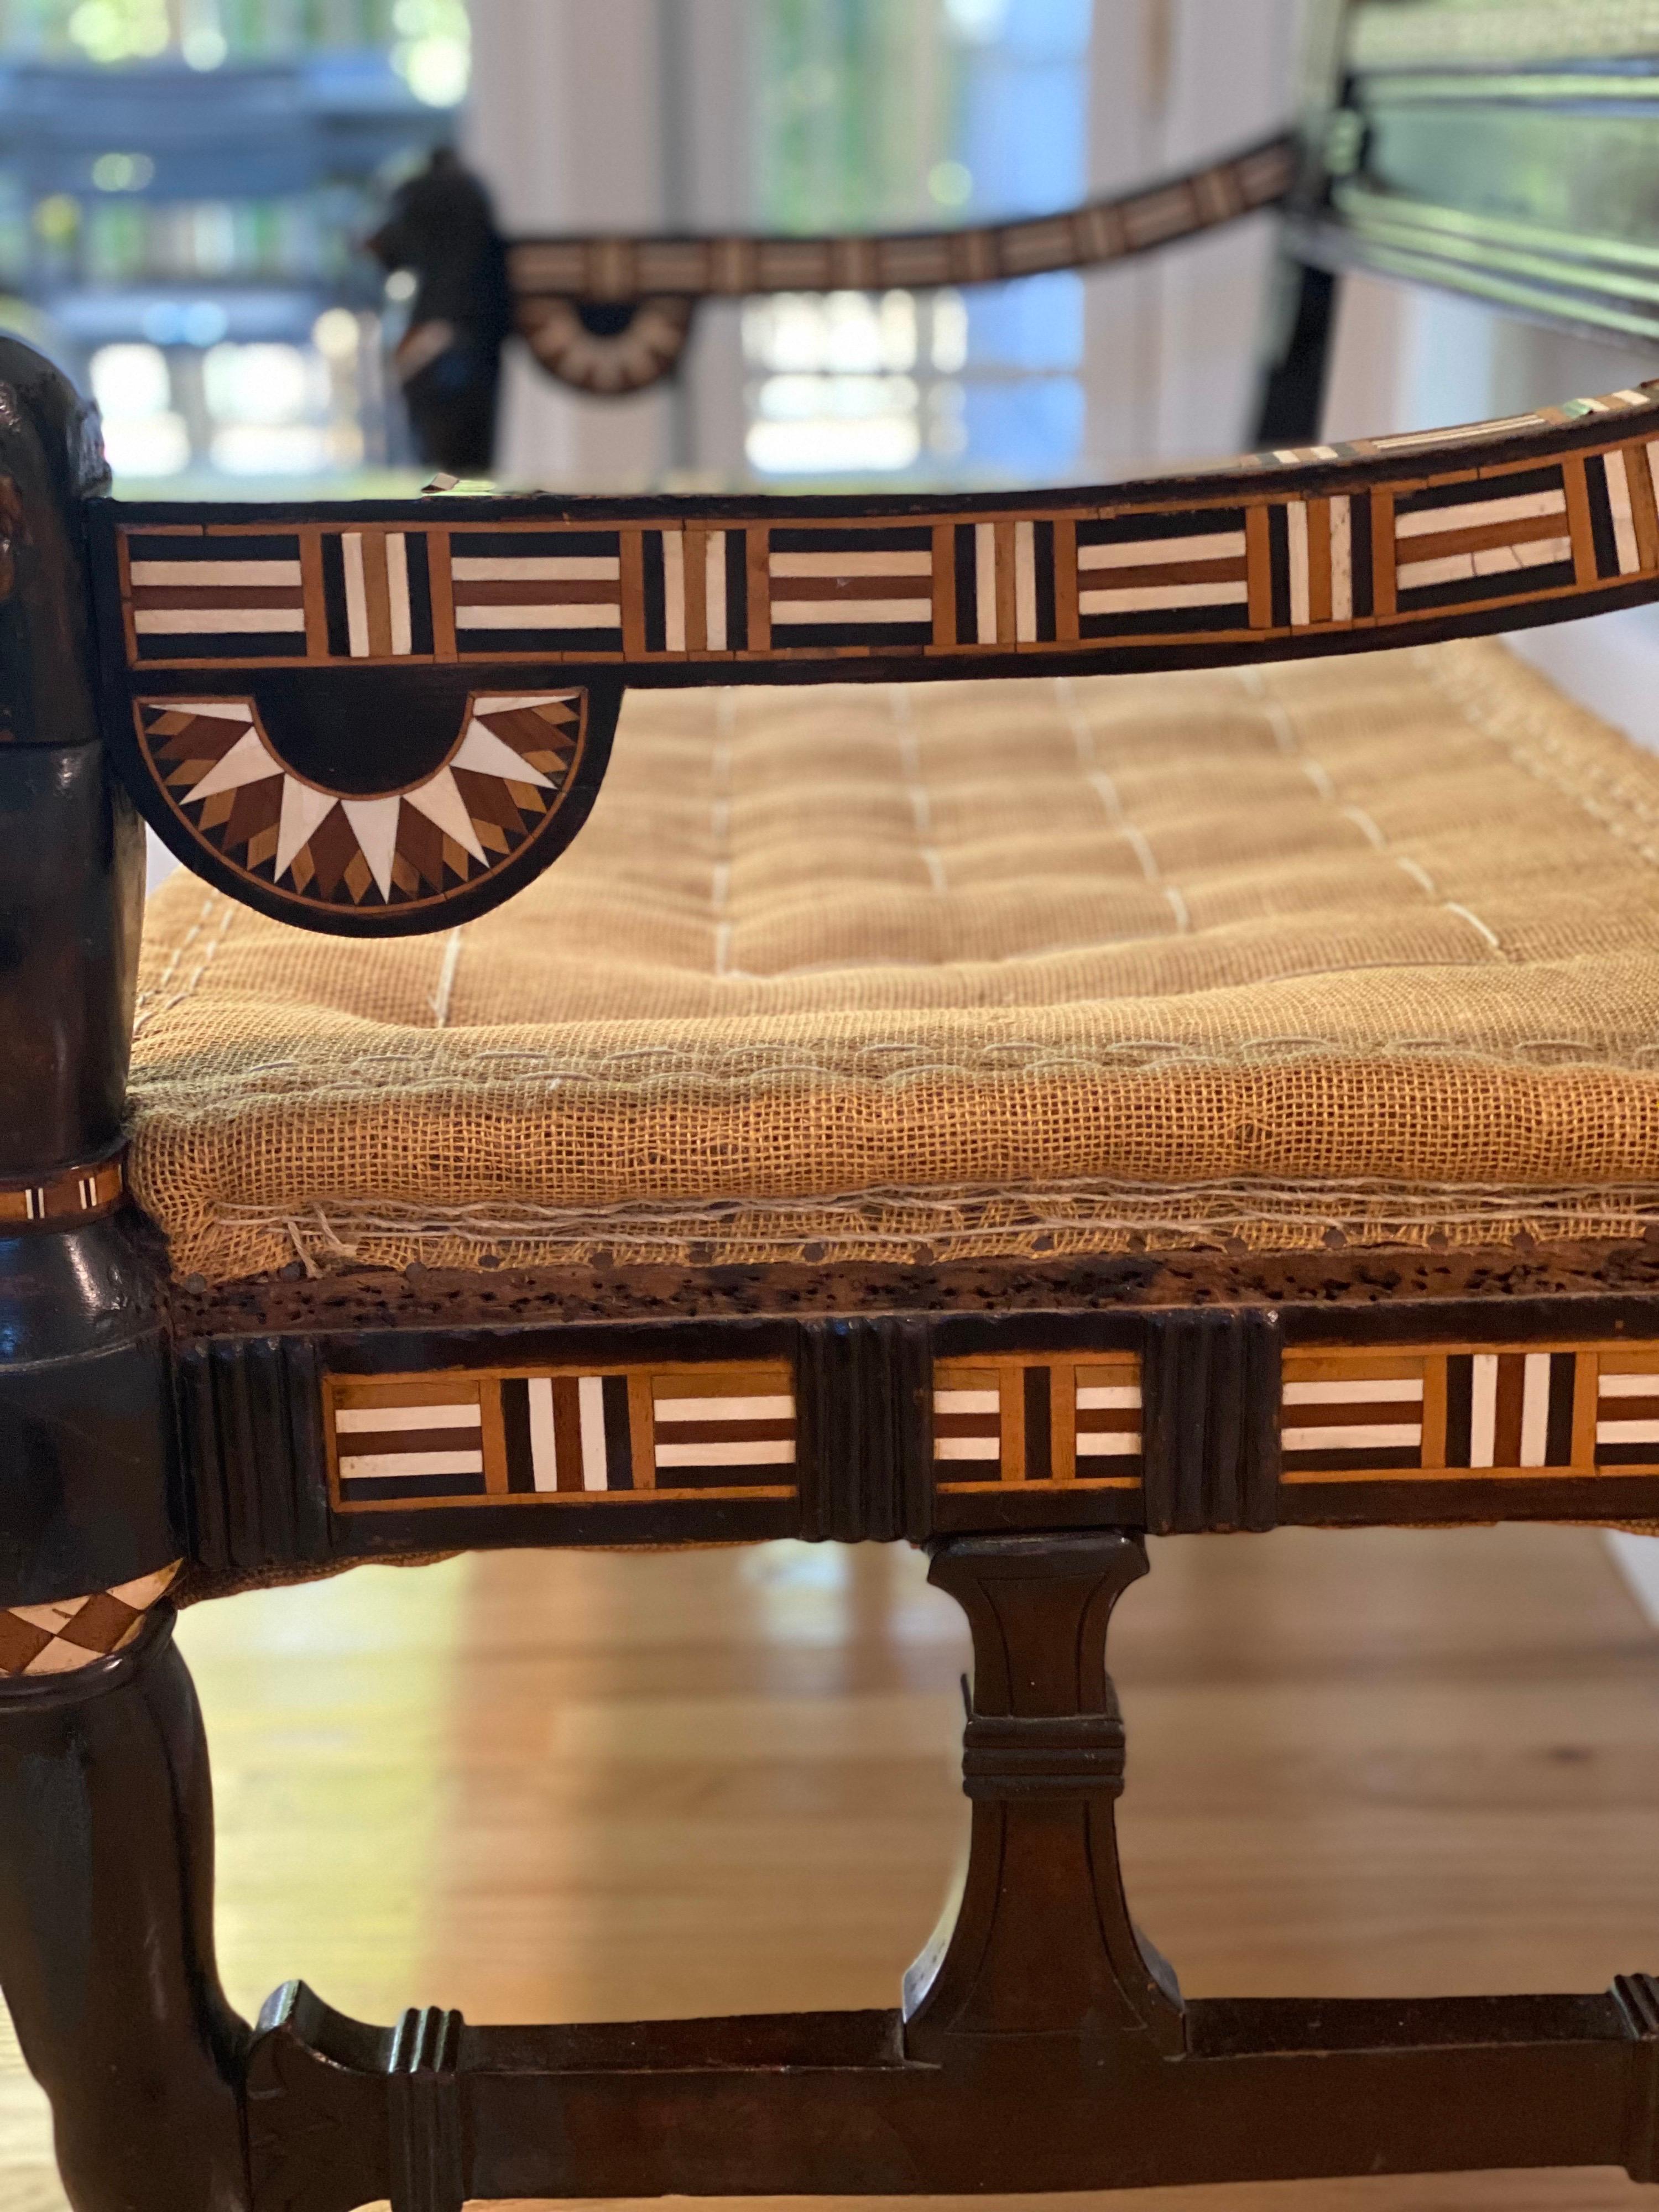 Rare Egyptian Revival Ebony and Inlaid Settee, Late 19th Century For Sale 5